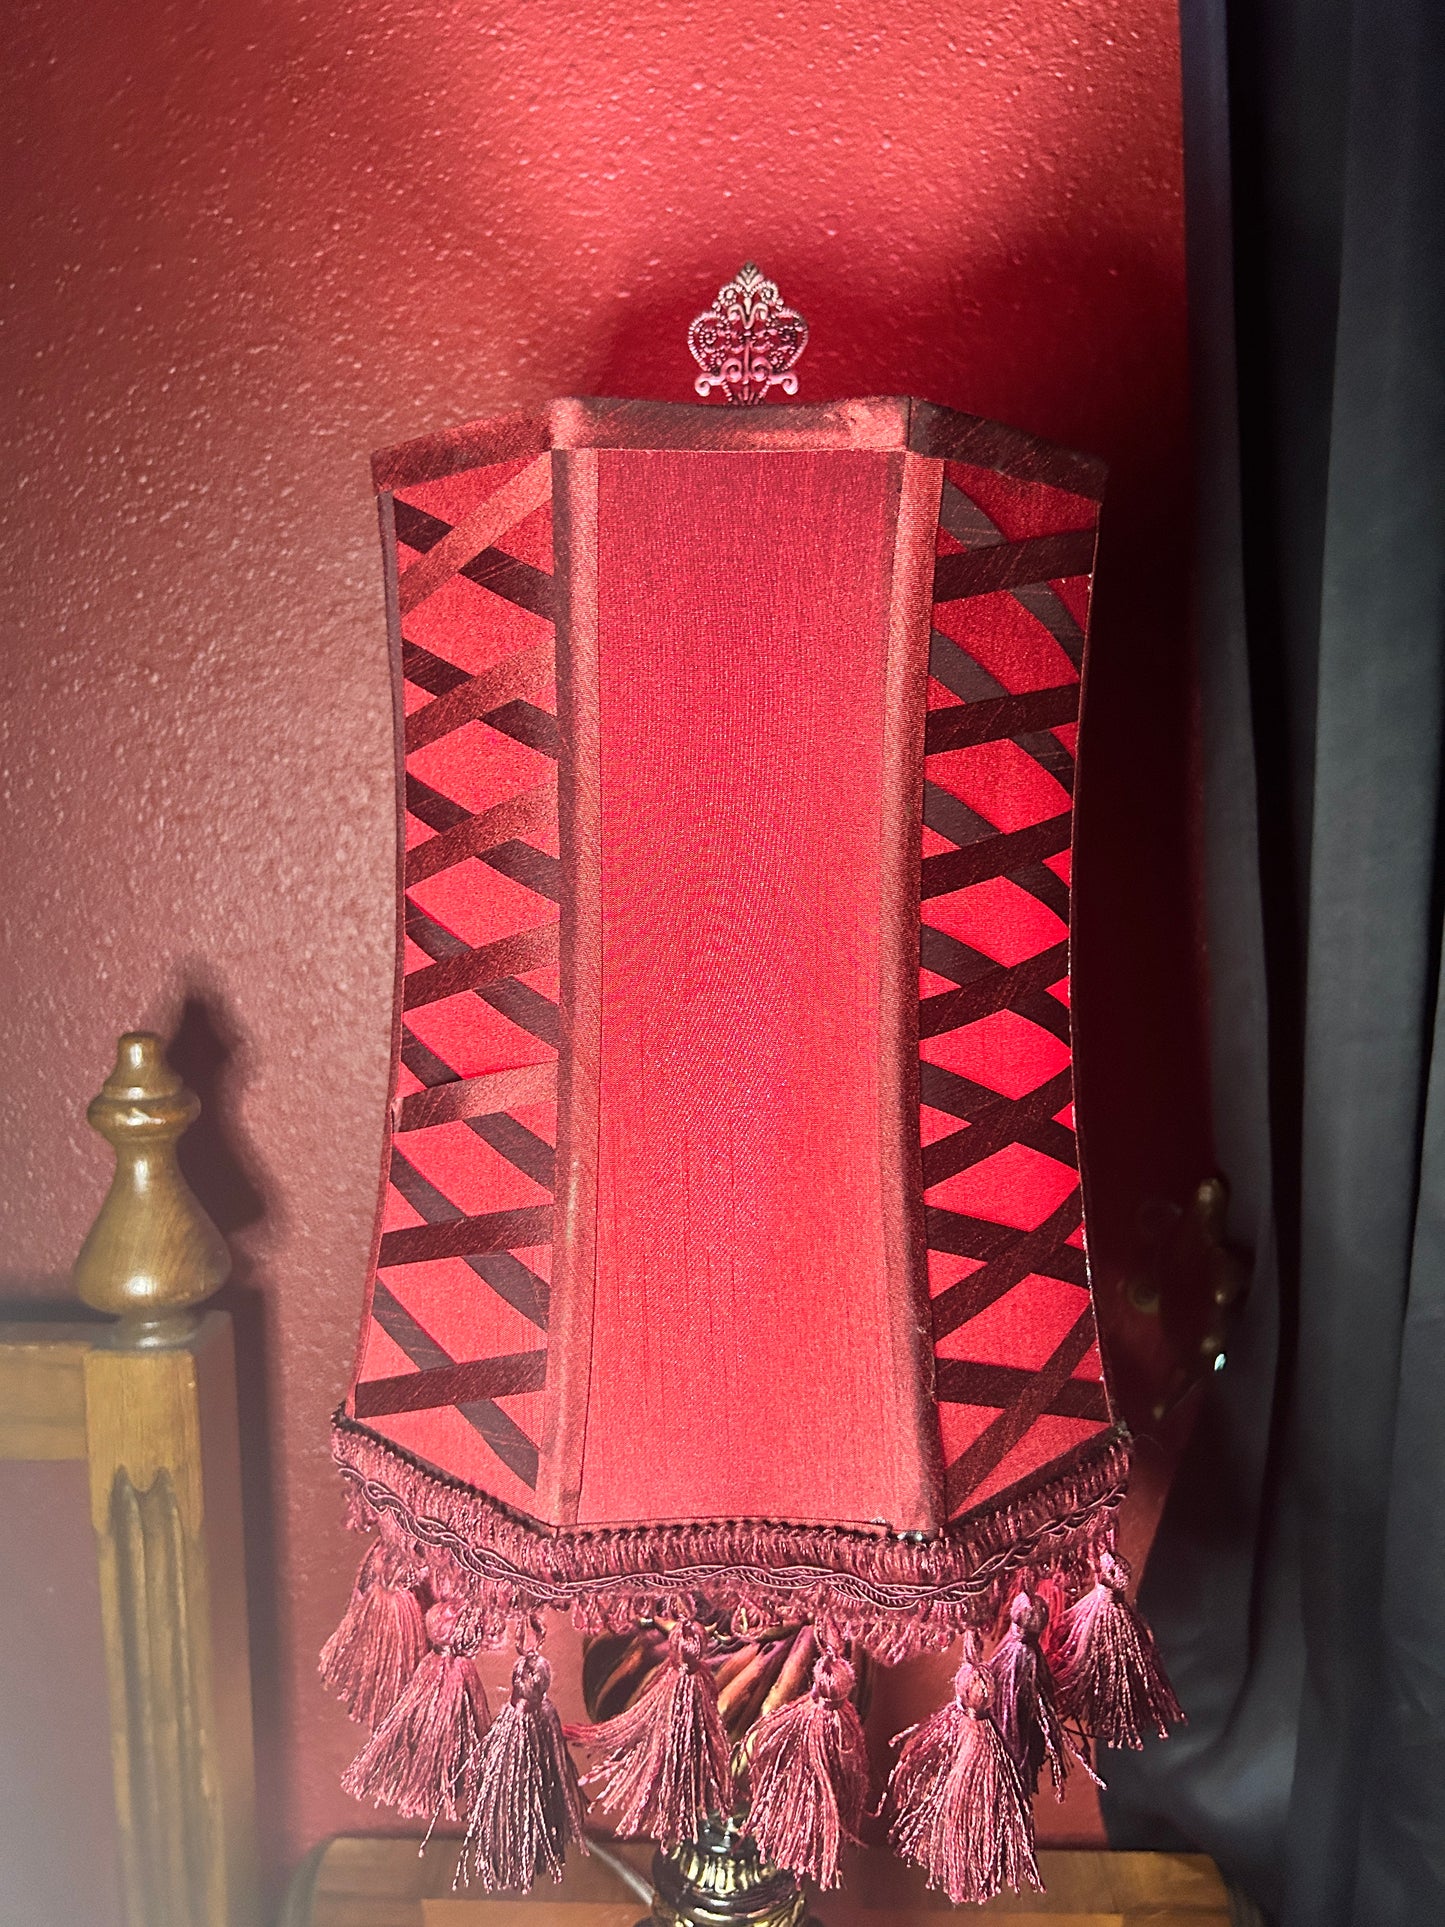 Boudoir Black & Gold Lamp with Red Shade